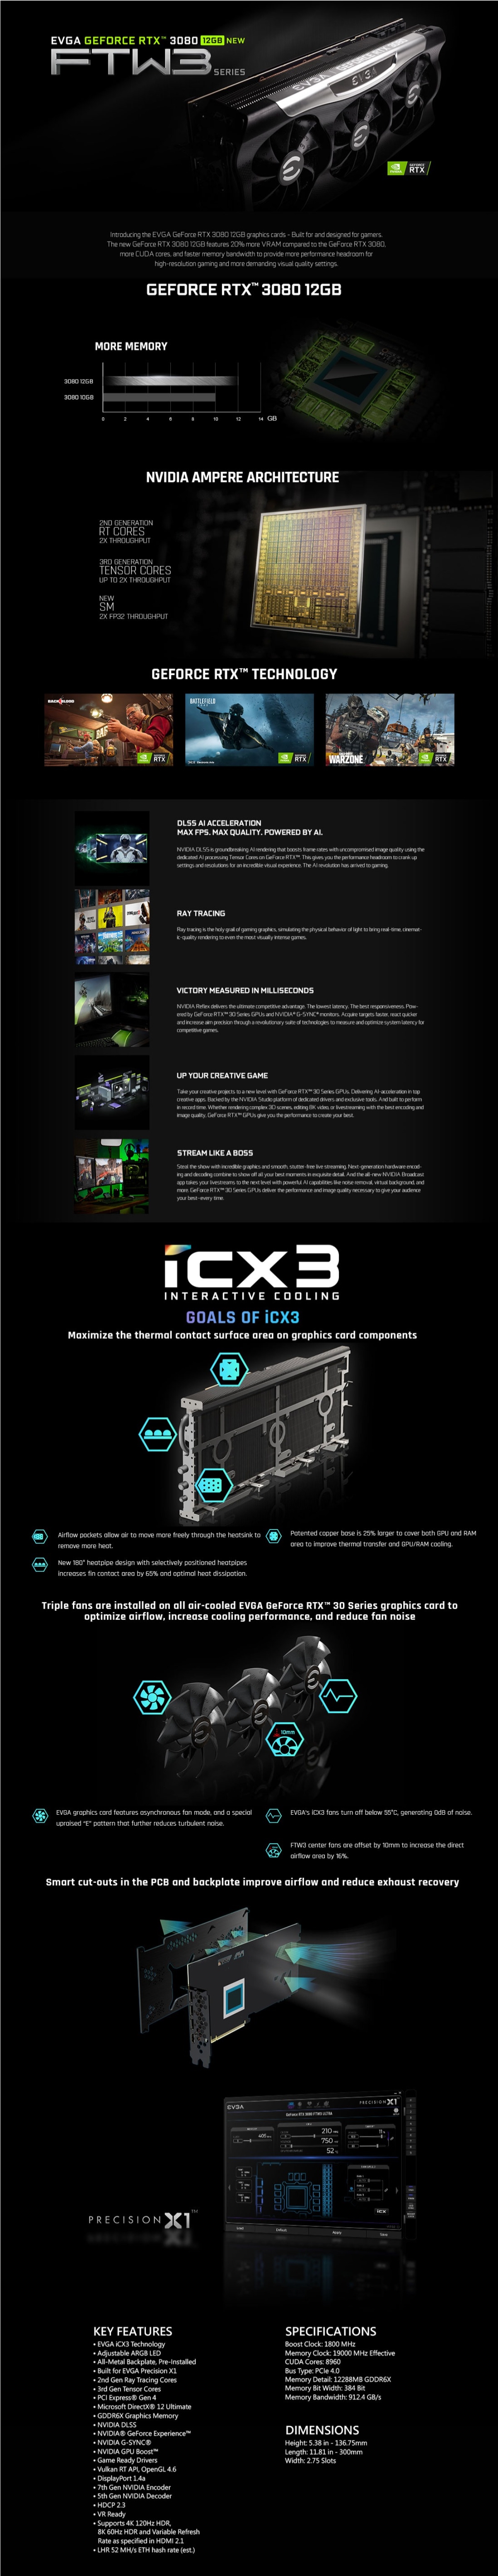 A large marketing image providing additional information about the product eVGA GeForce RTX 3080 FTW3 Ultra LHR 12GB GDDR6X - Additional alt info not provided